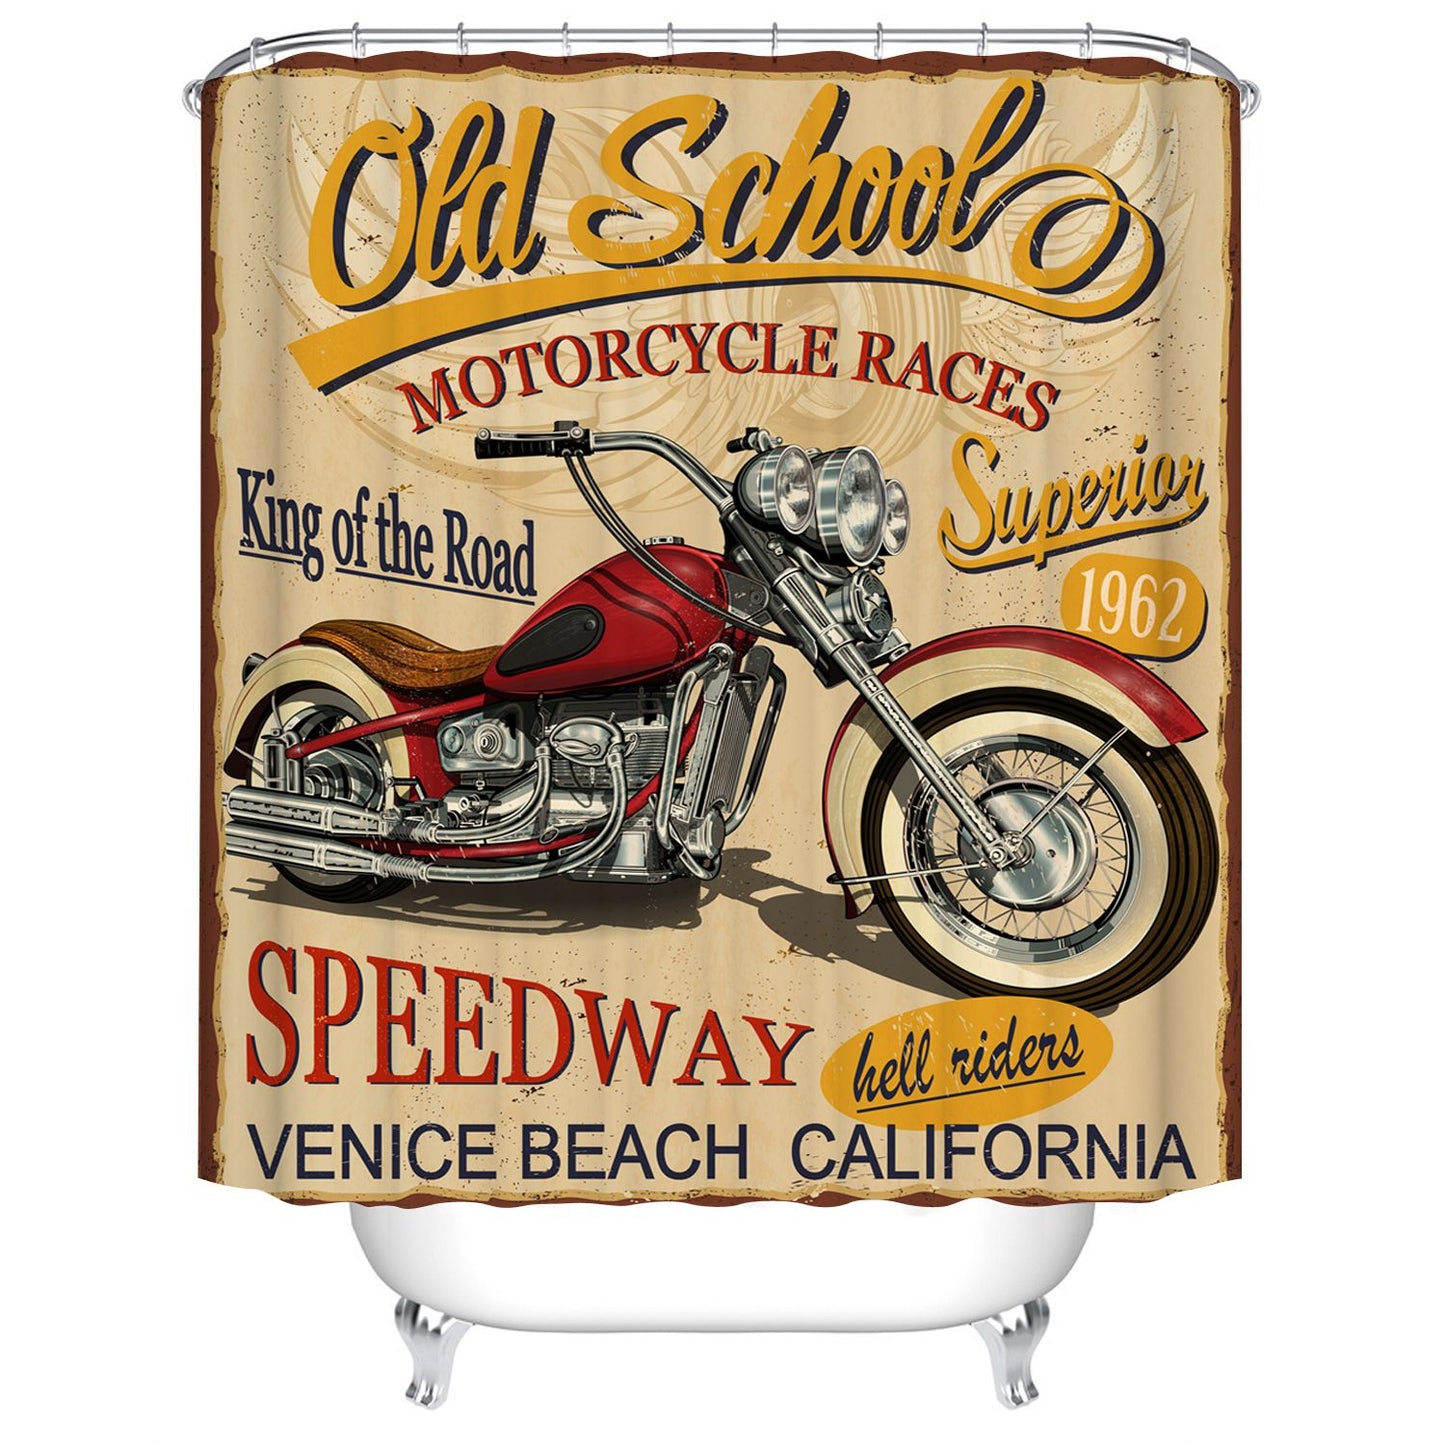 Old School Motorcycle Races Shower Curtain Vintage 1962 Poster